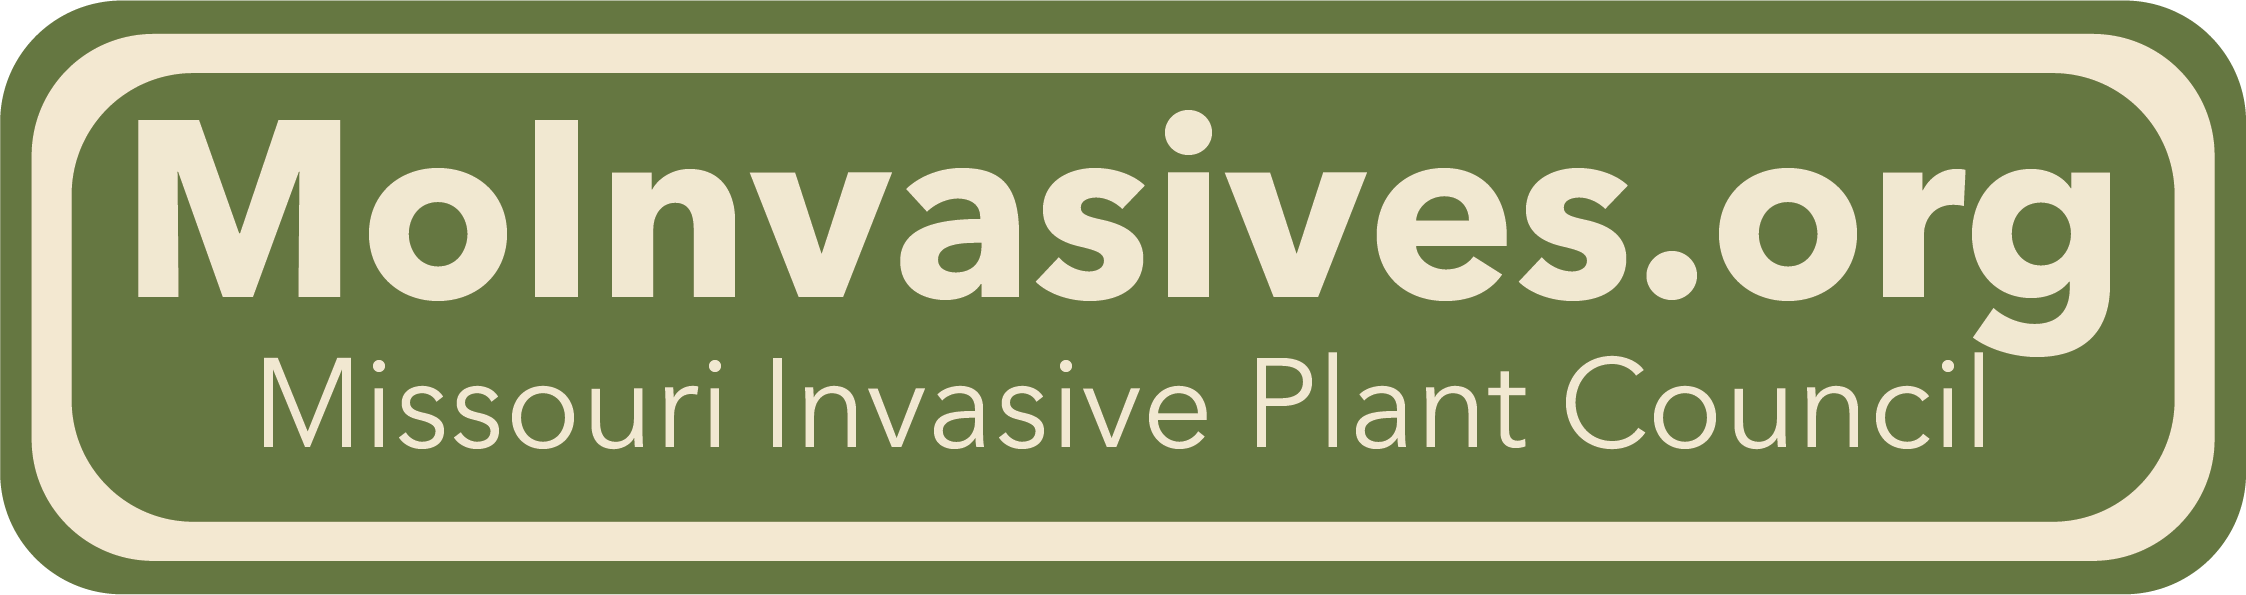 MoInvasives.org logo text in cream on sage green